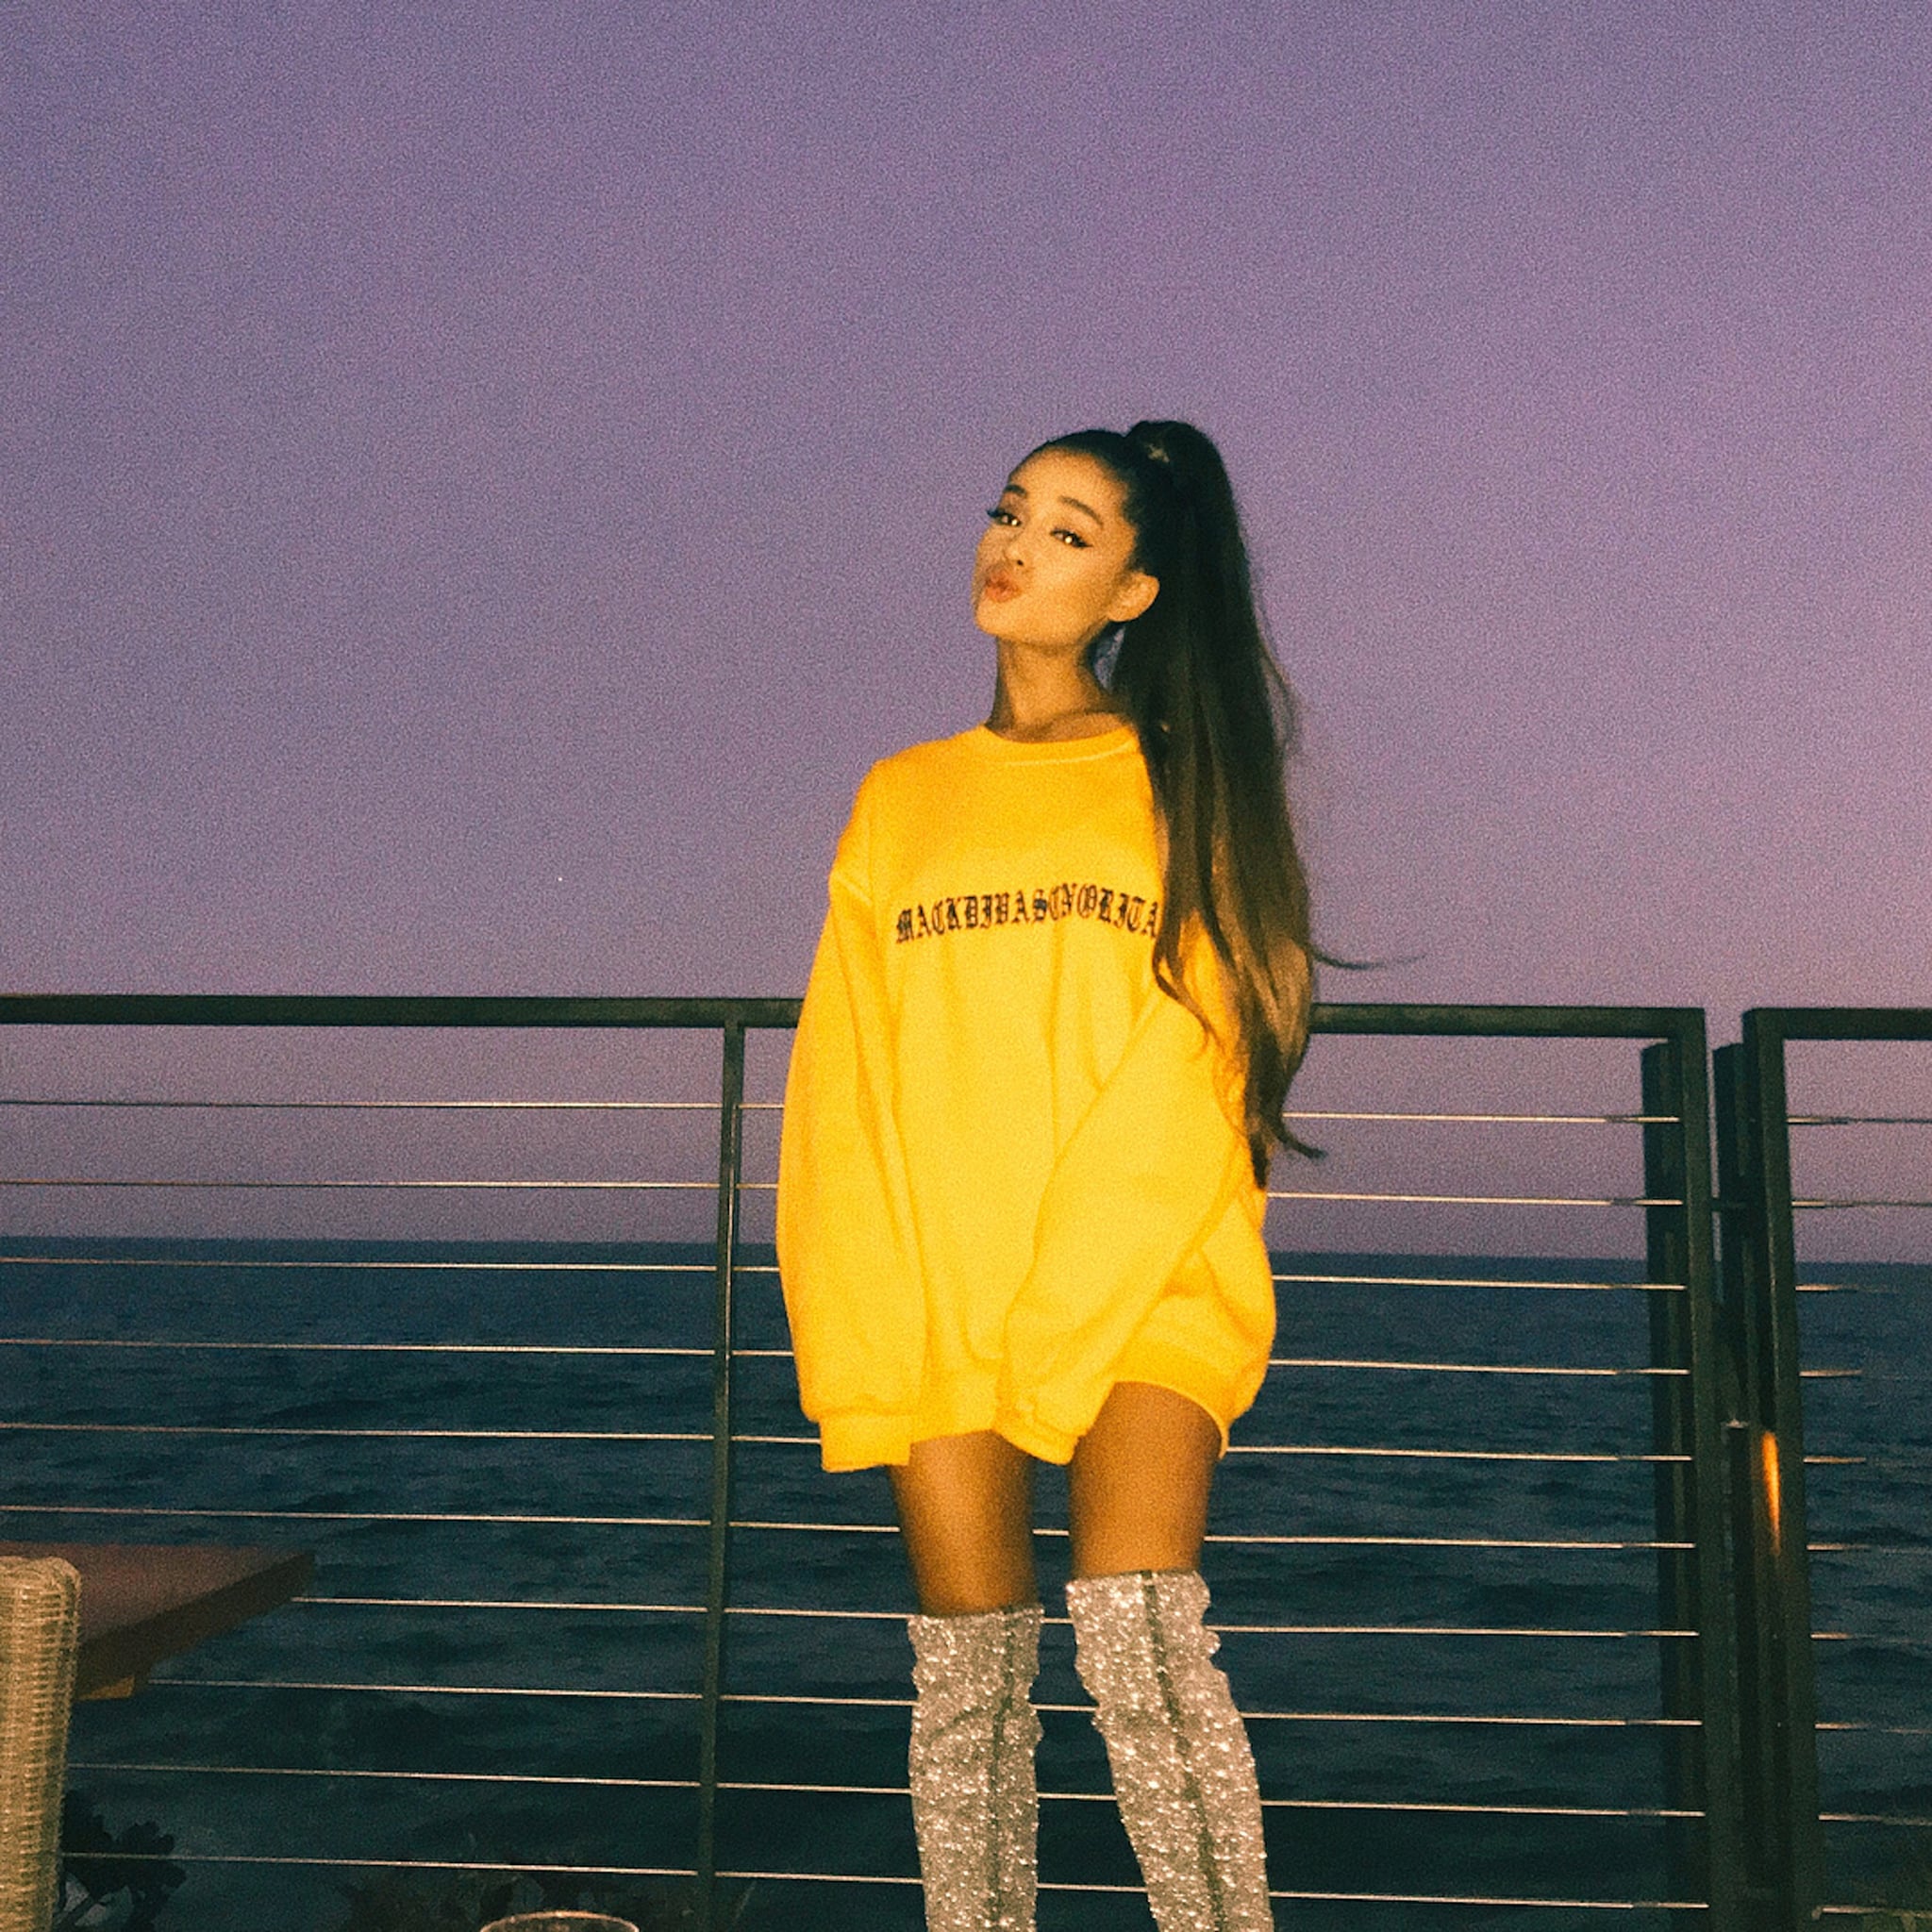 Ariana Grande Outfits And Style Pictures Popsugar Fashion